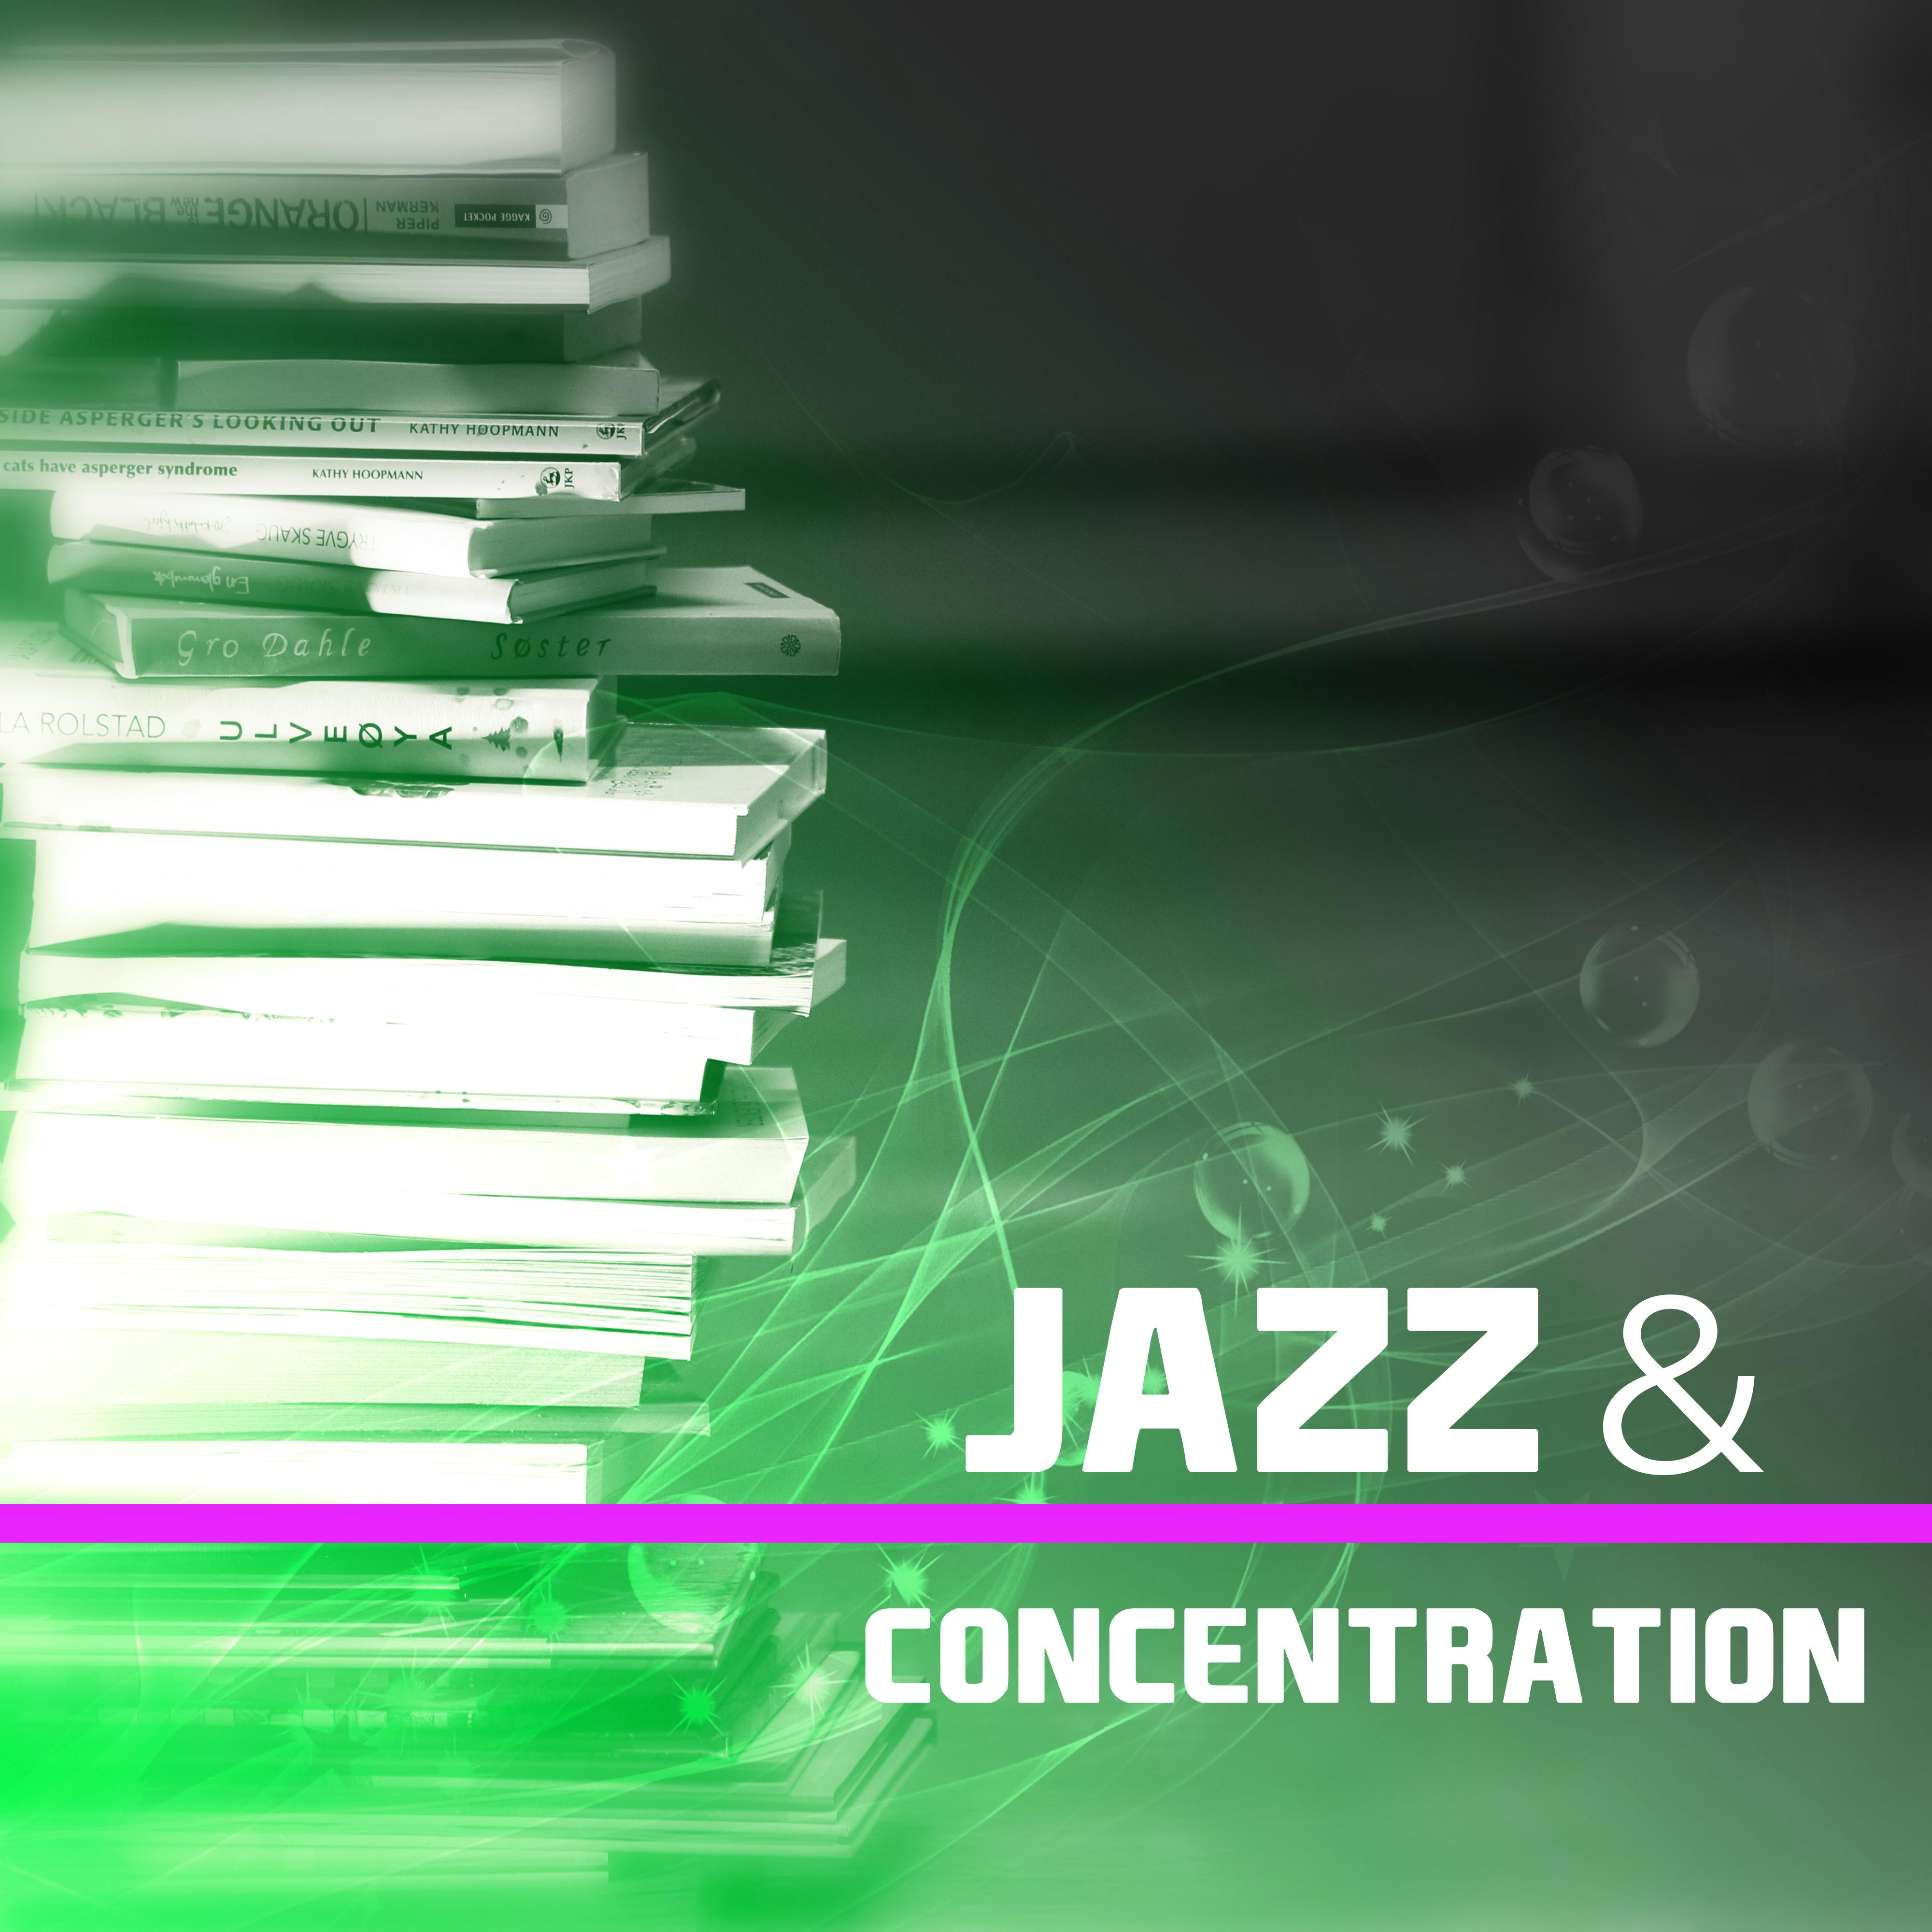 Jazz  Concentration  Study Music, Best Smooth Jazz for Better Memory, Brain Power, Stress Relief, Peaceful Piano, Deep Focus, Mellow Jazz